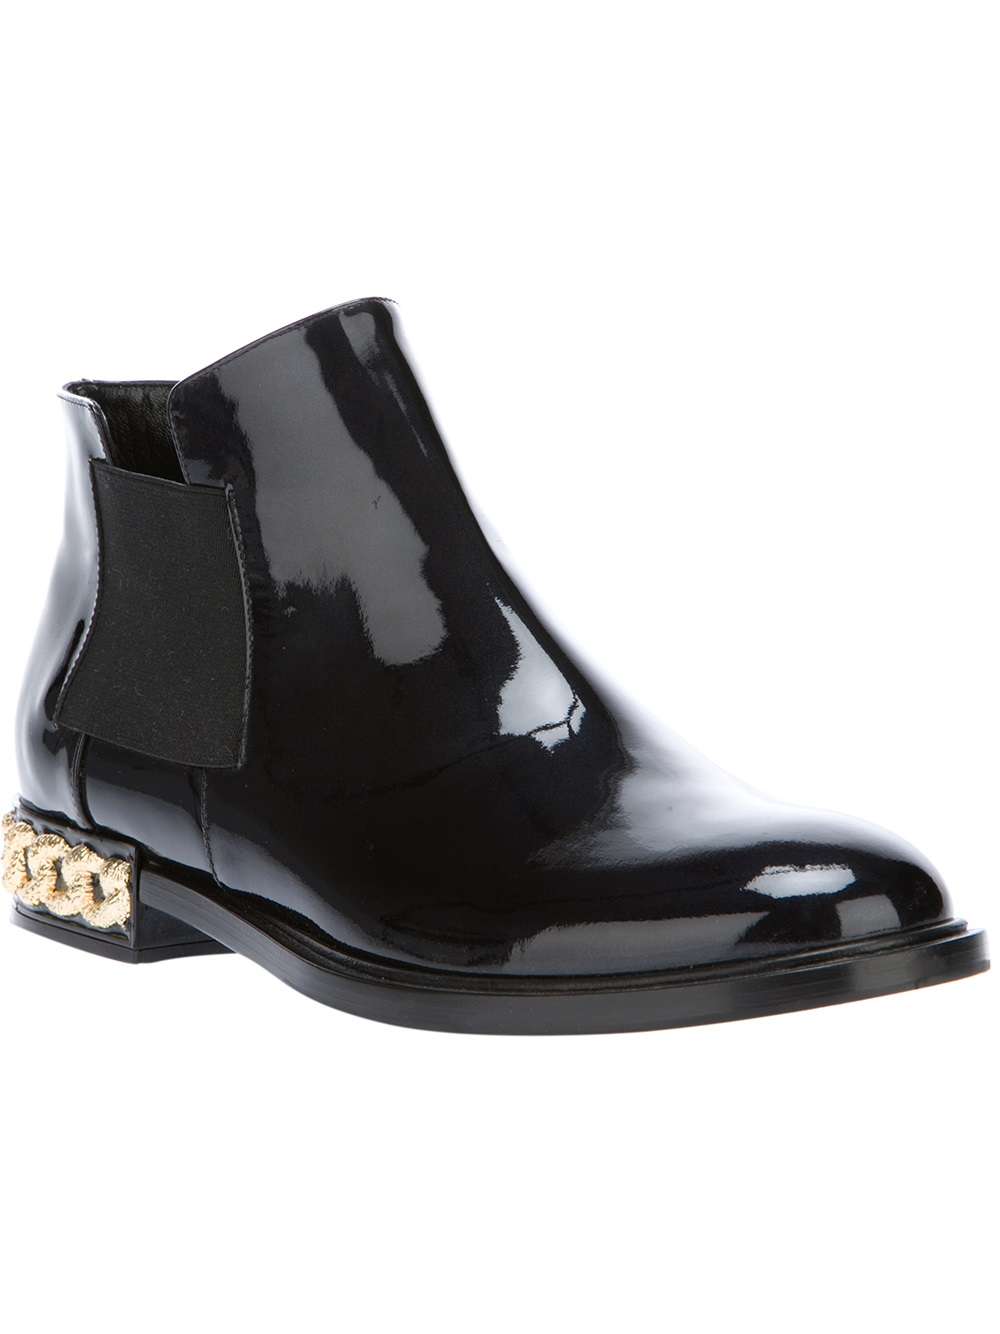 Lyst - Casadei Chain Detail Chelsea Boot in Black